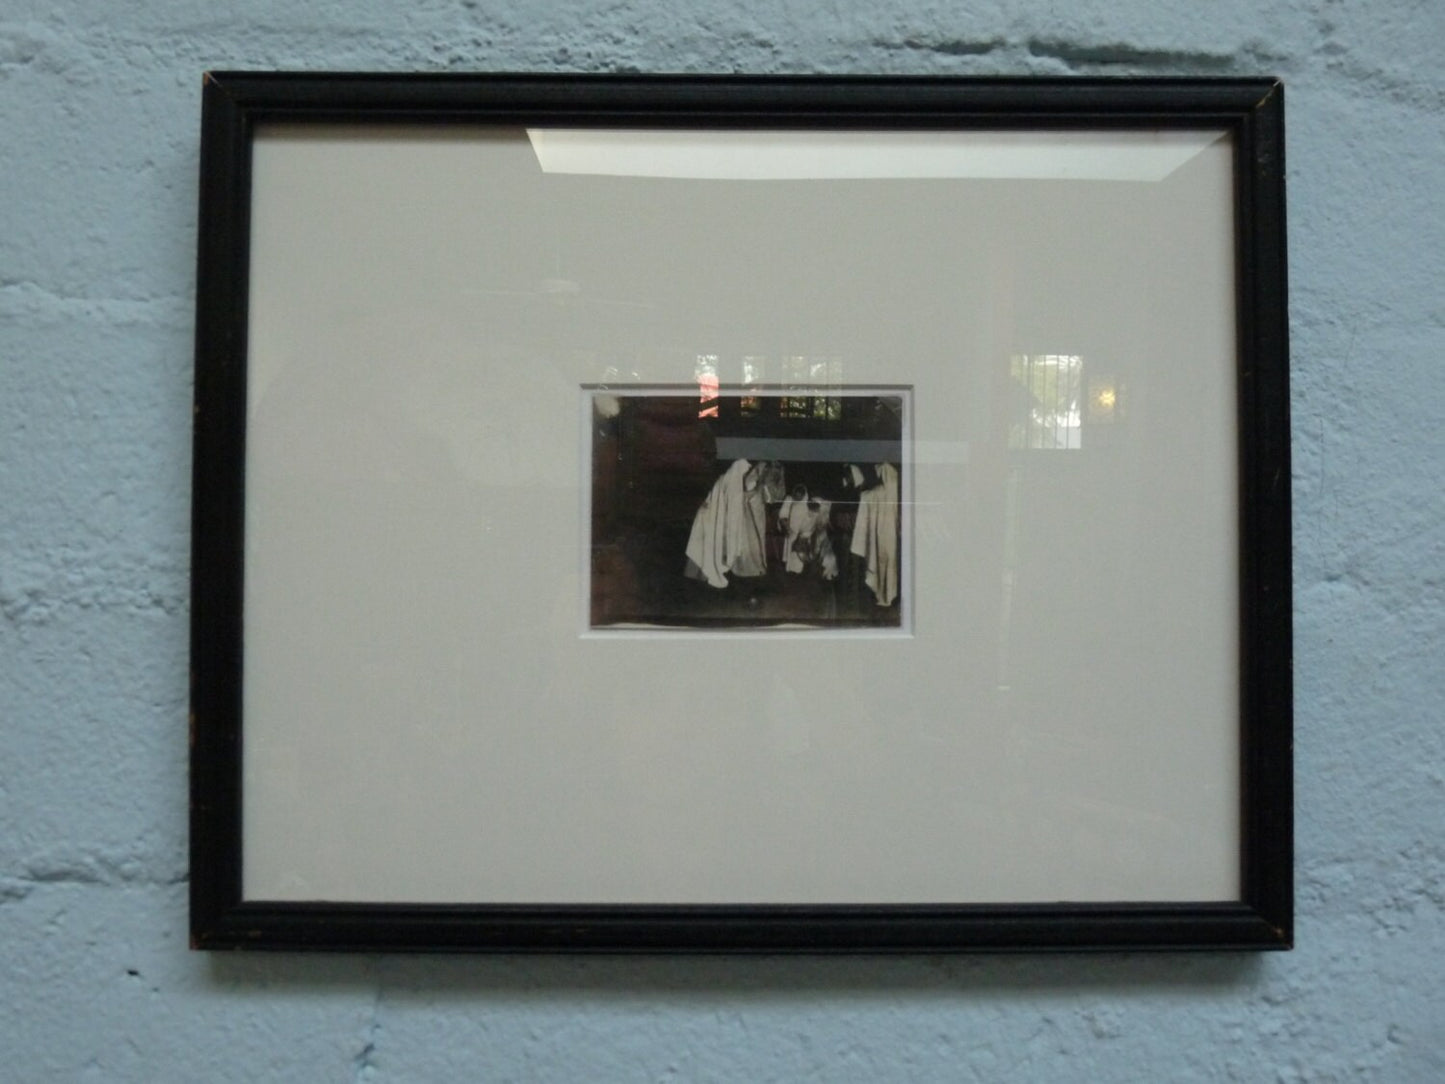 Framed Mysterious Vintage Black and White Photo From The 1920s